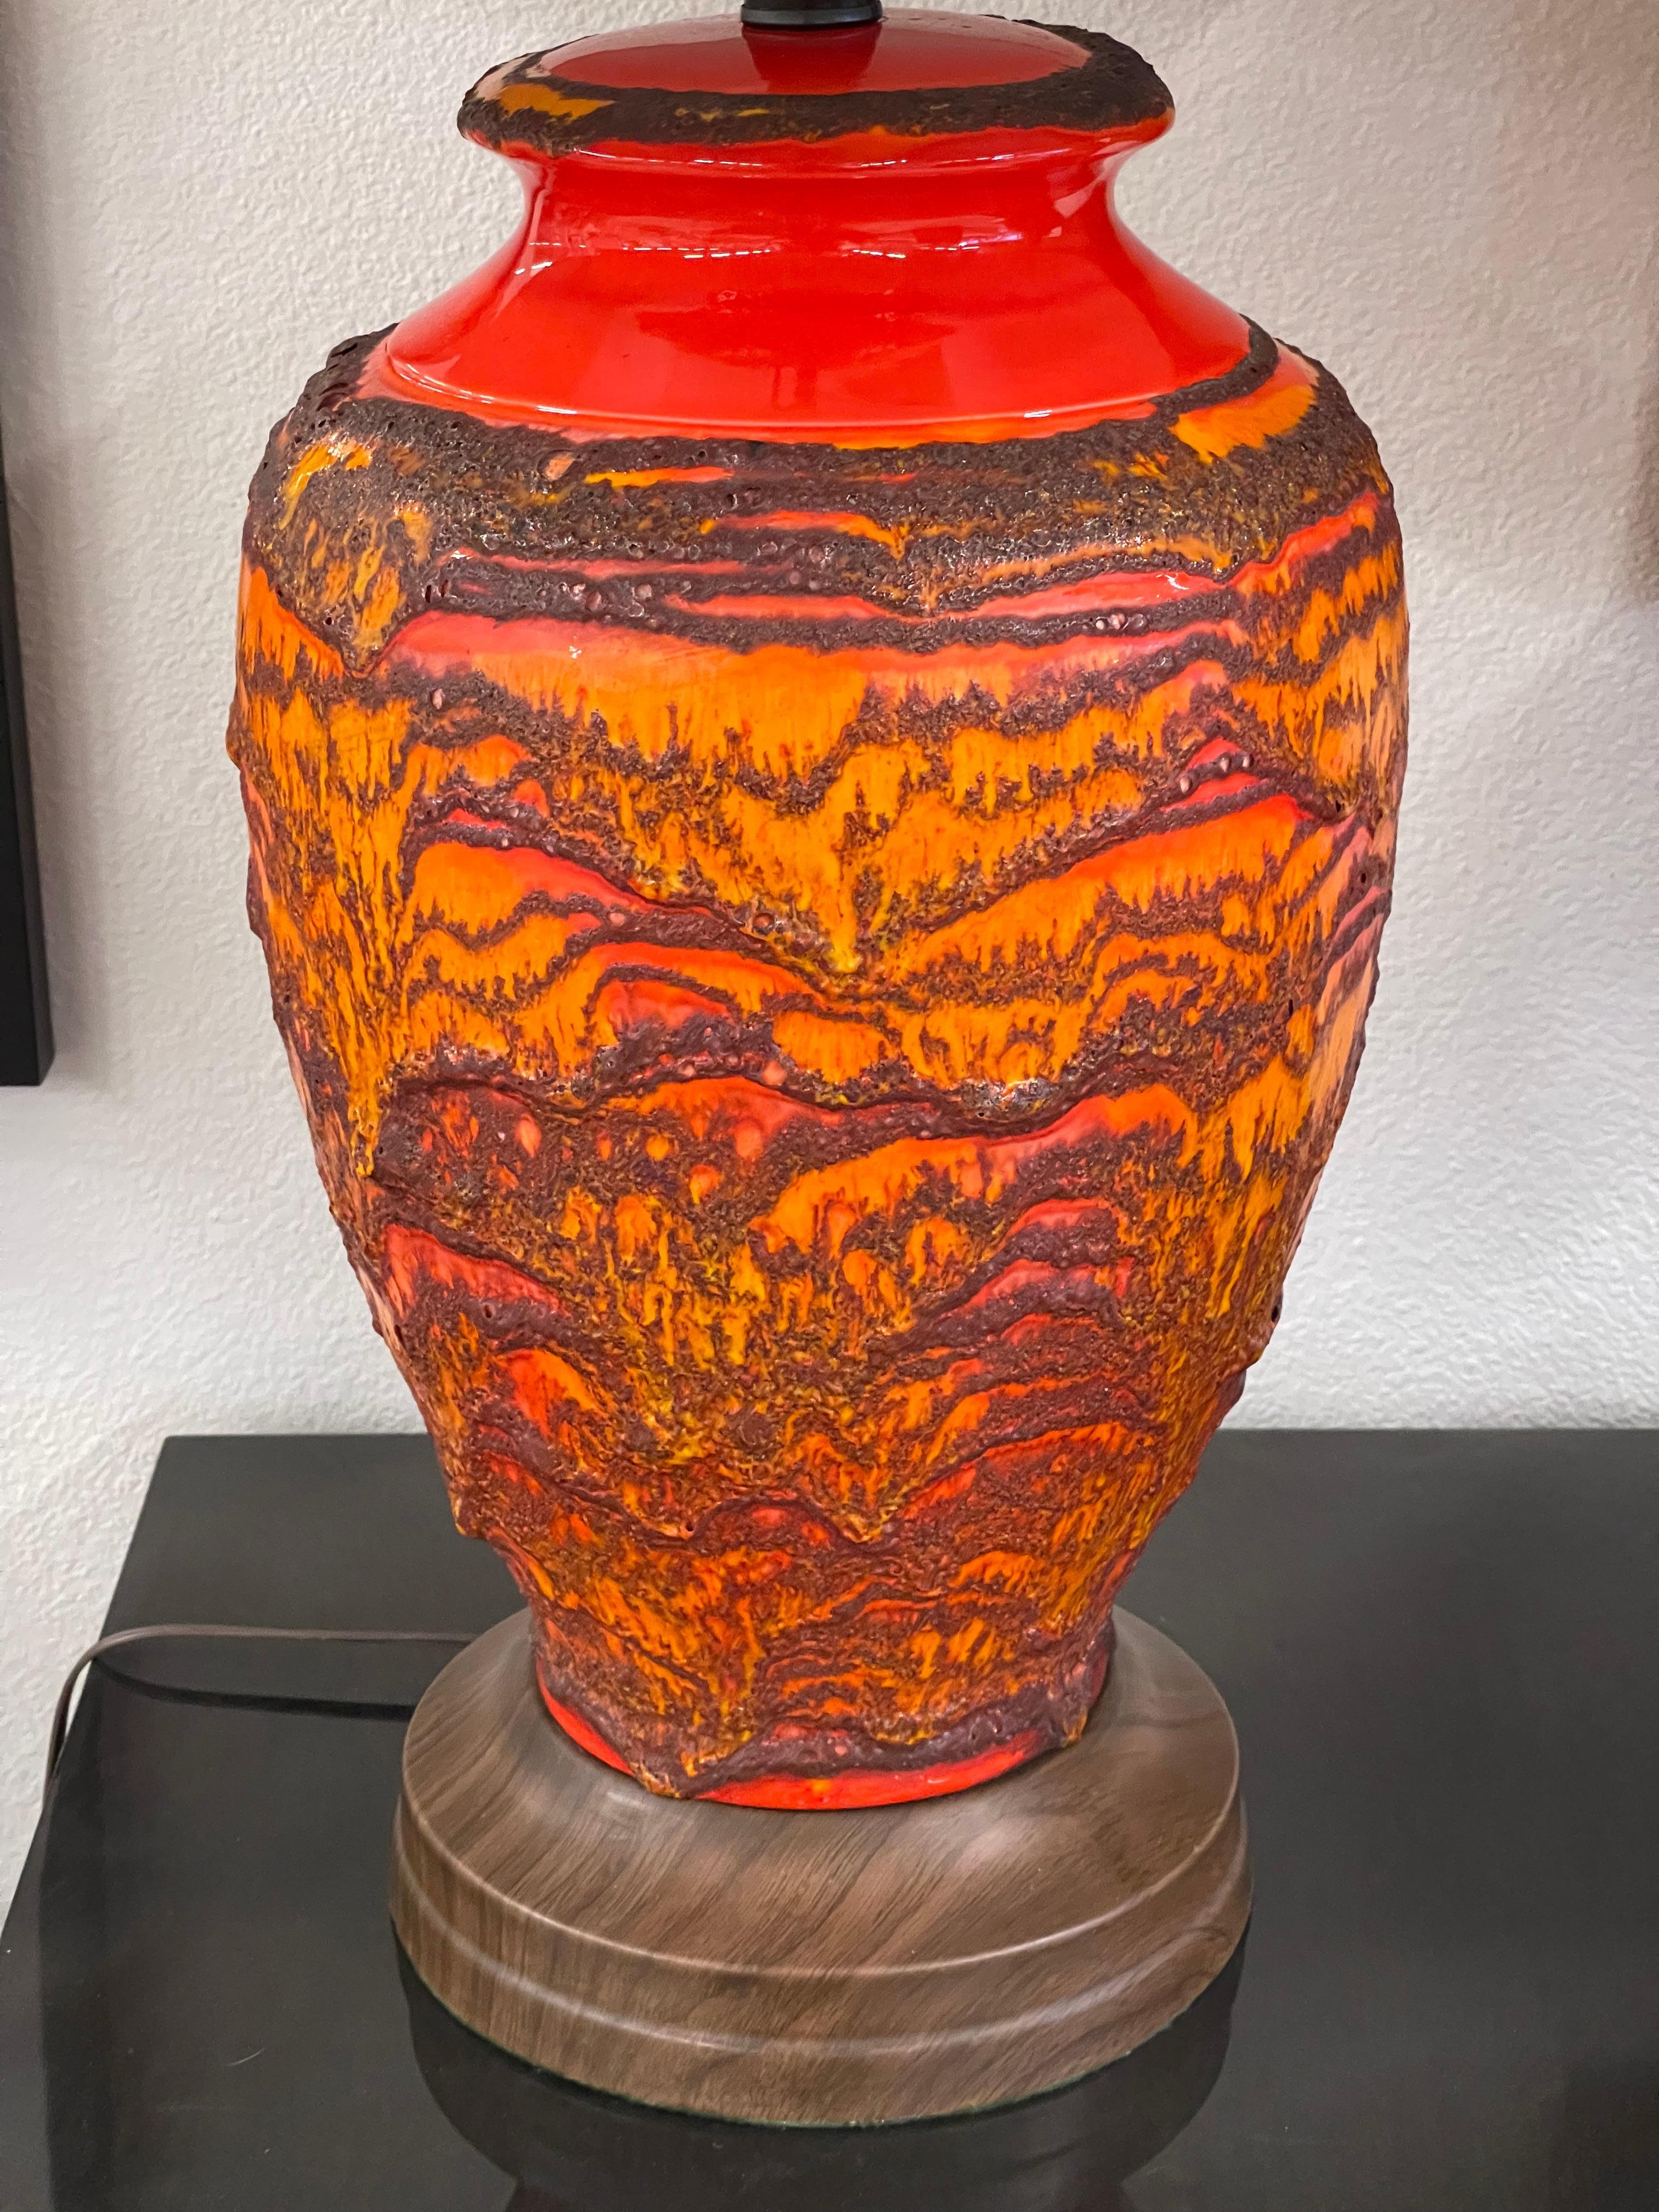 A great pair of vintage ceramic lamps in a Lava Glaze. Bright orange and red, these have just been re-wired with new electrical fittings. The base and green felt are original. Likely West German, possibly Scheurich Keramik, these are massive. The